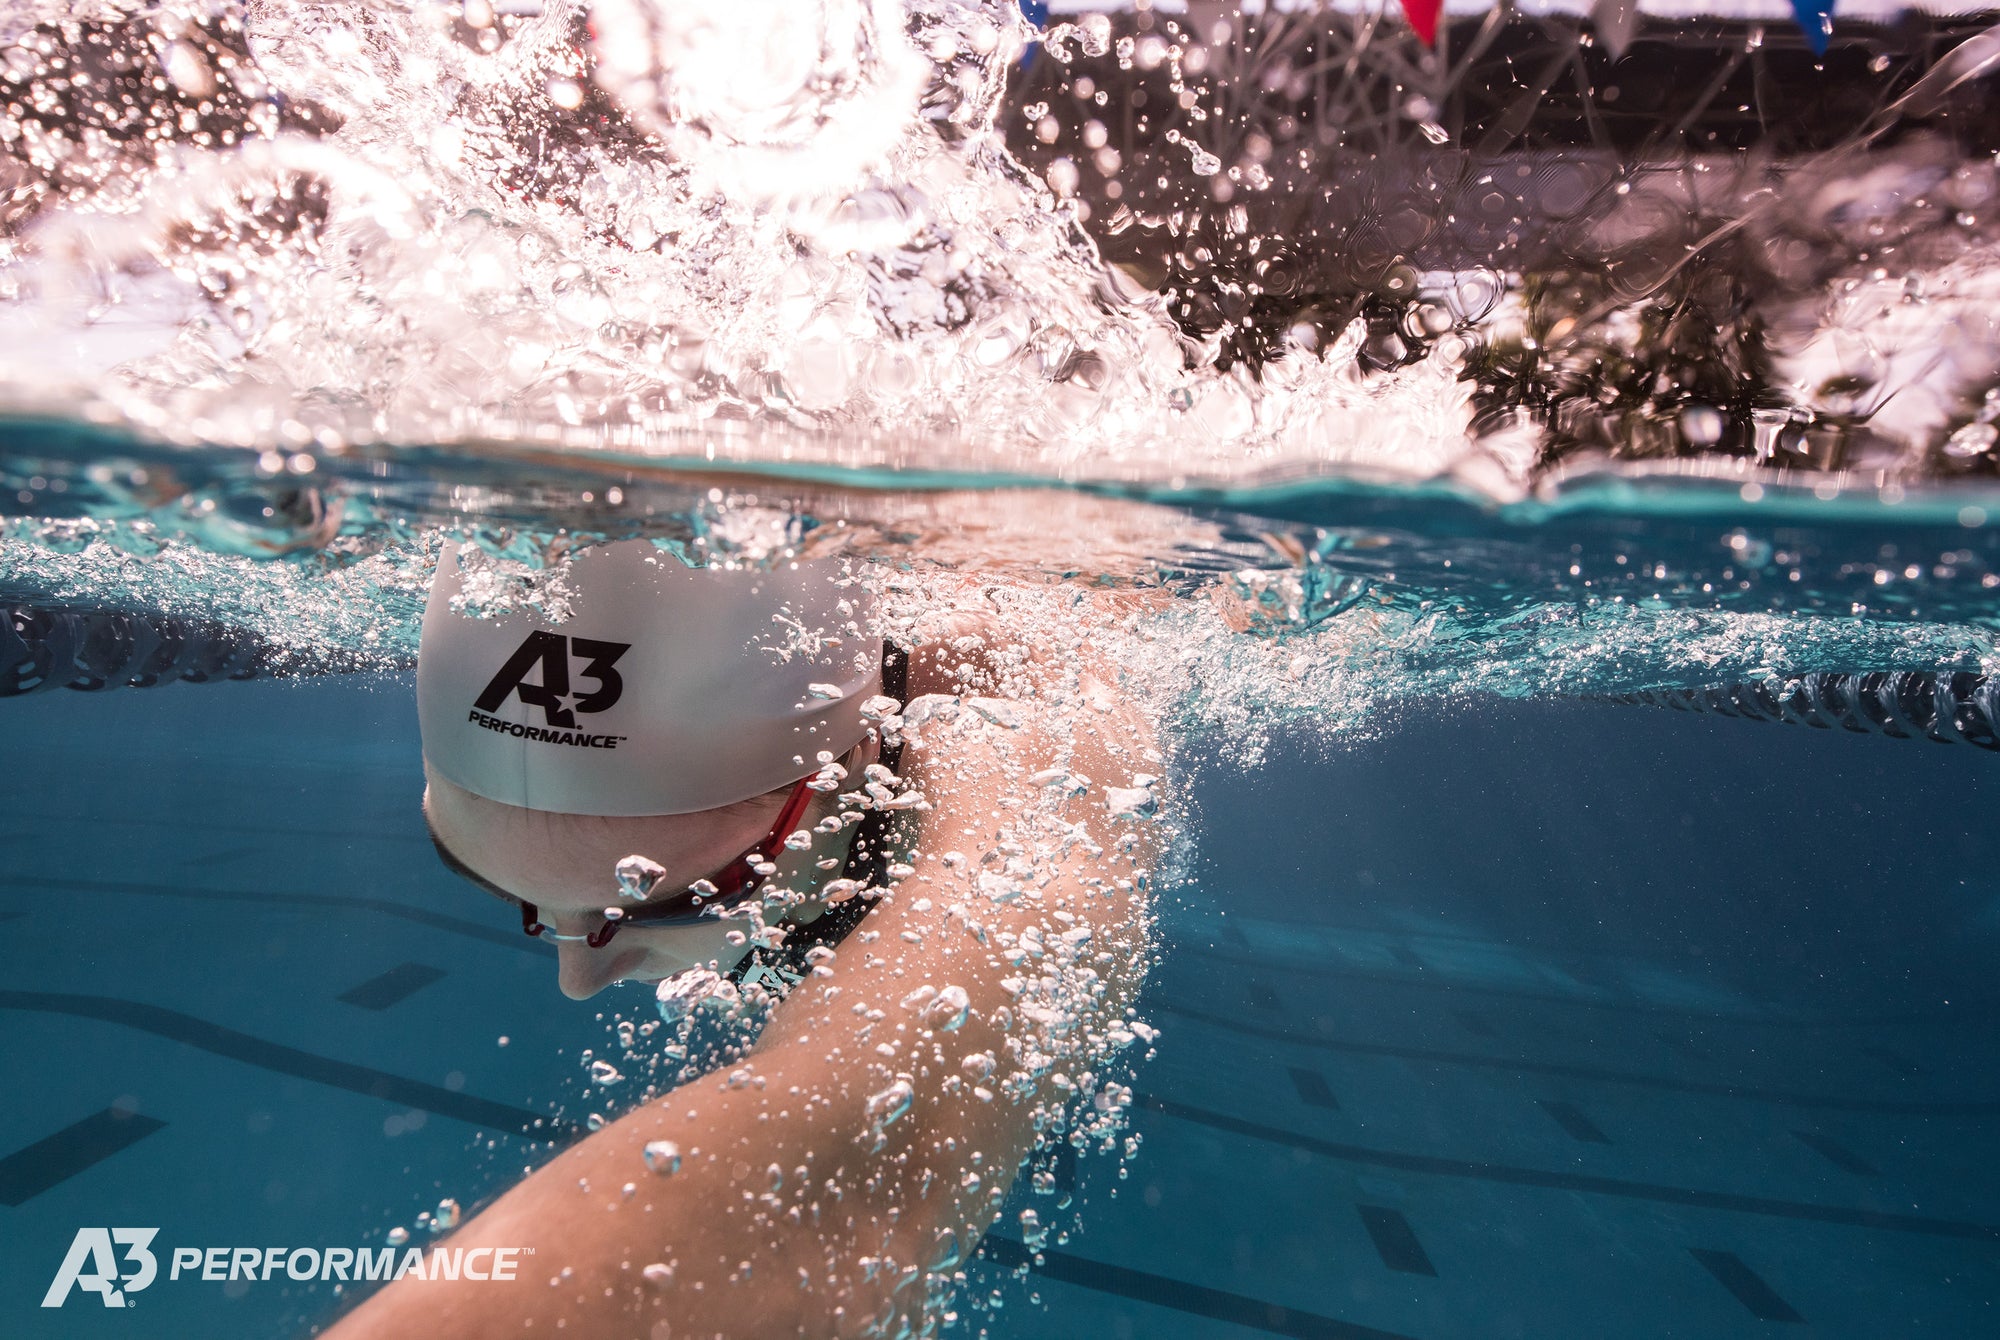 A3 Performance Racing - A Suit for Every Swimmer